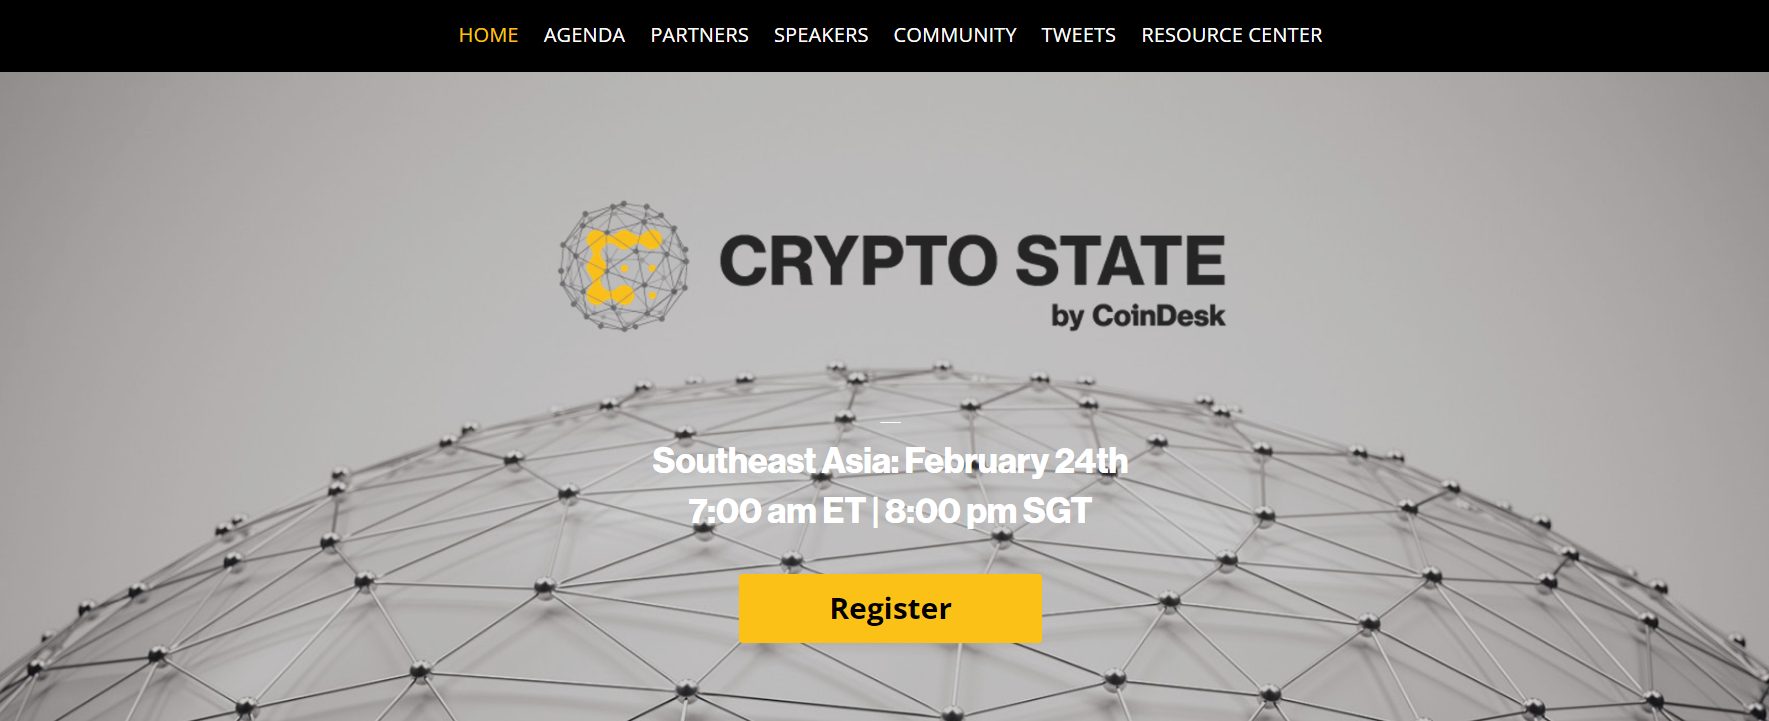 Crypto State by Coindesk